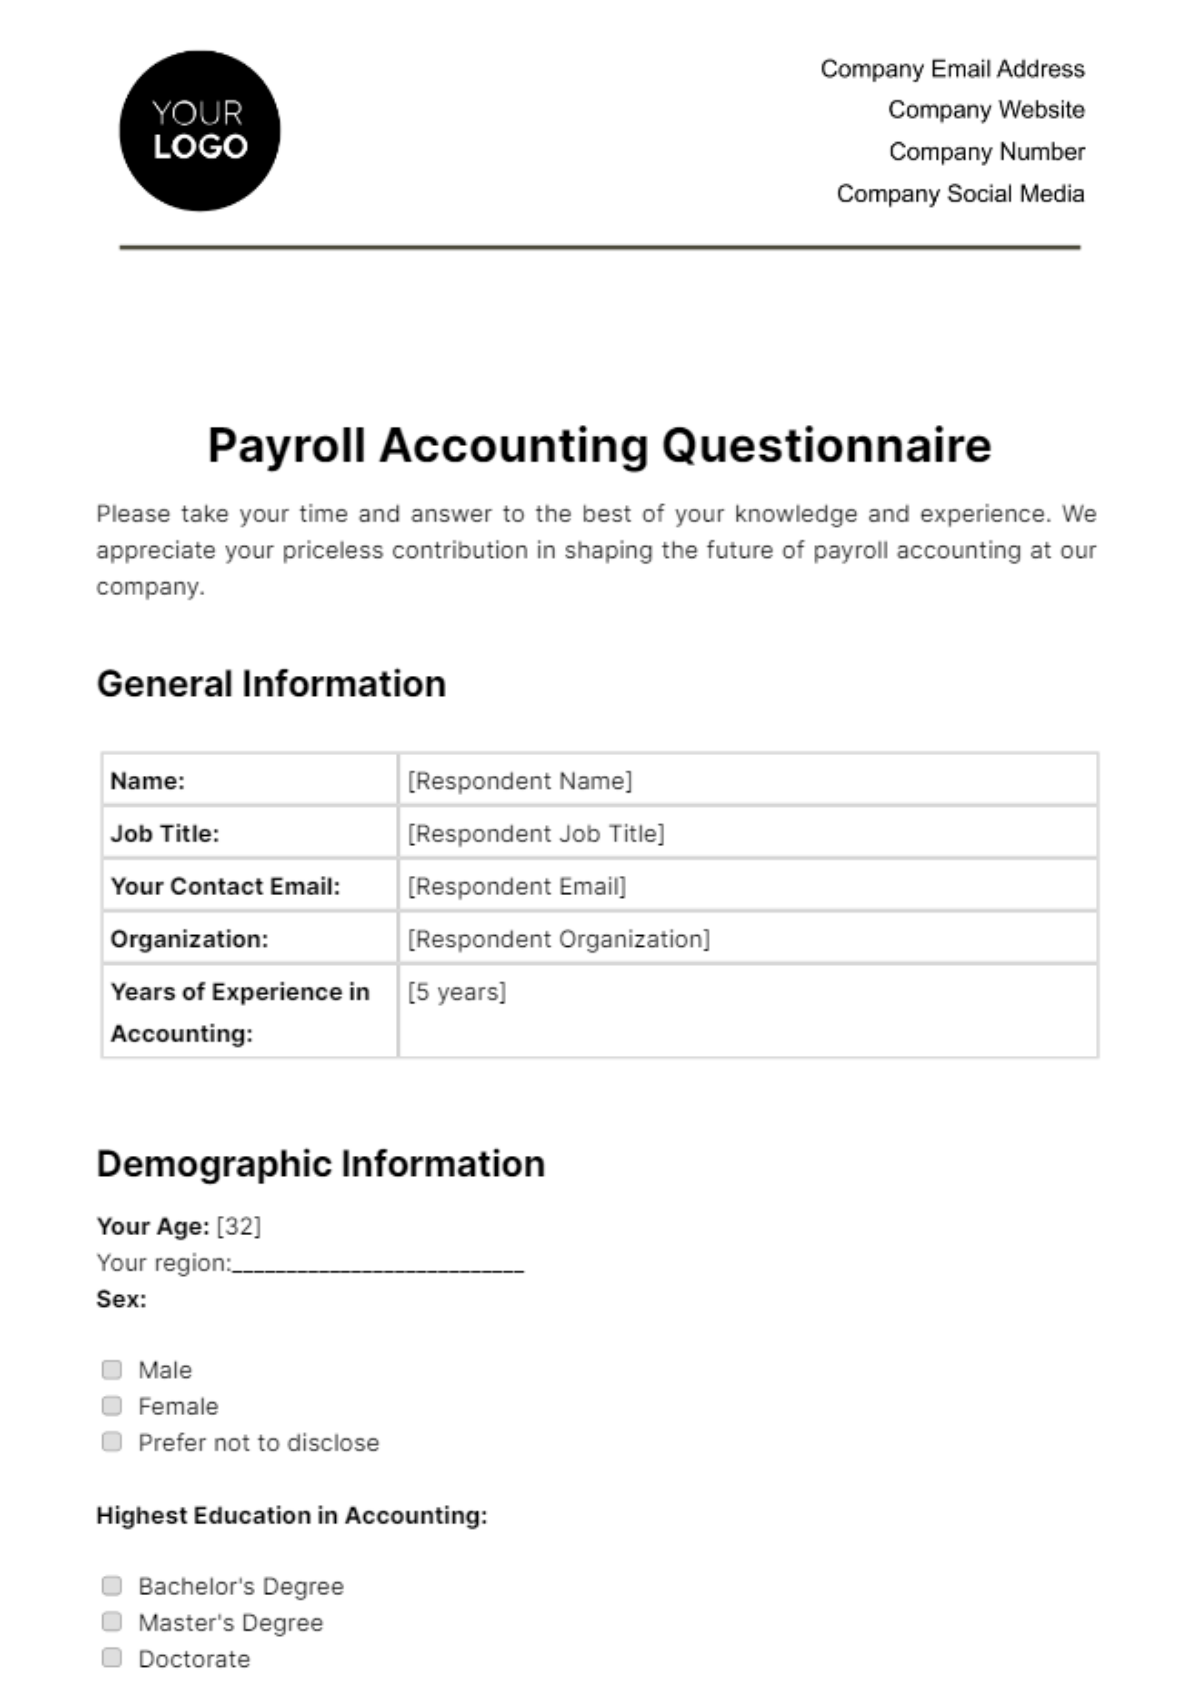 Payroll Accounting Questionnaire Template